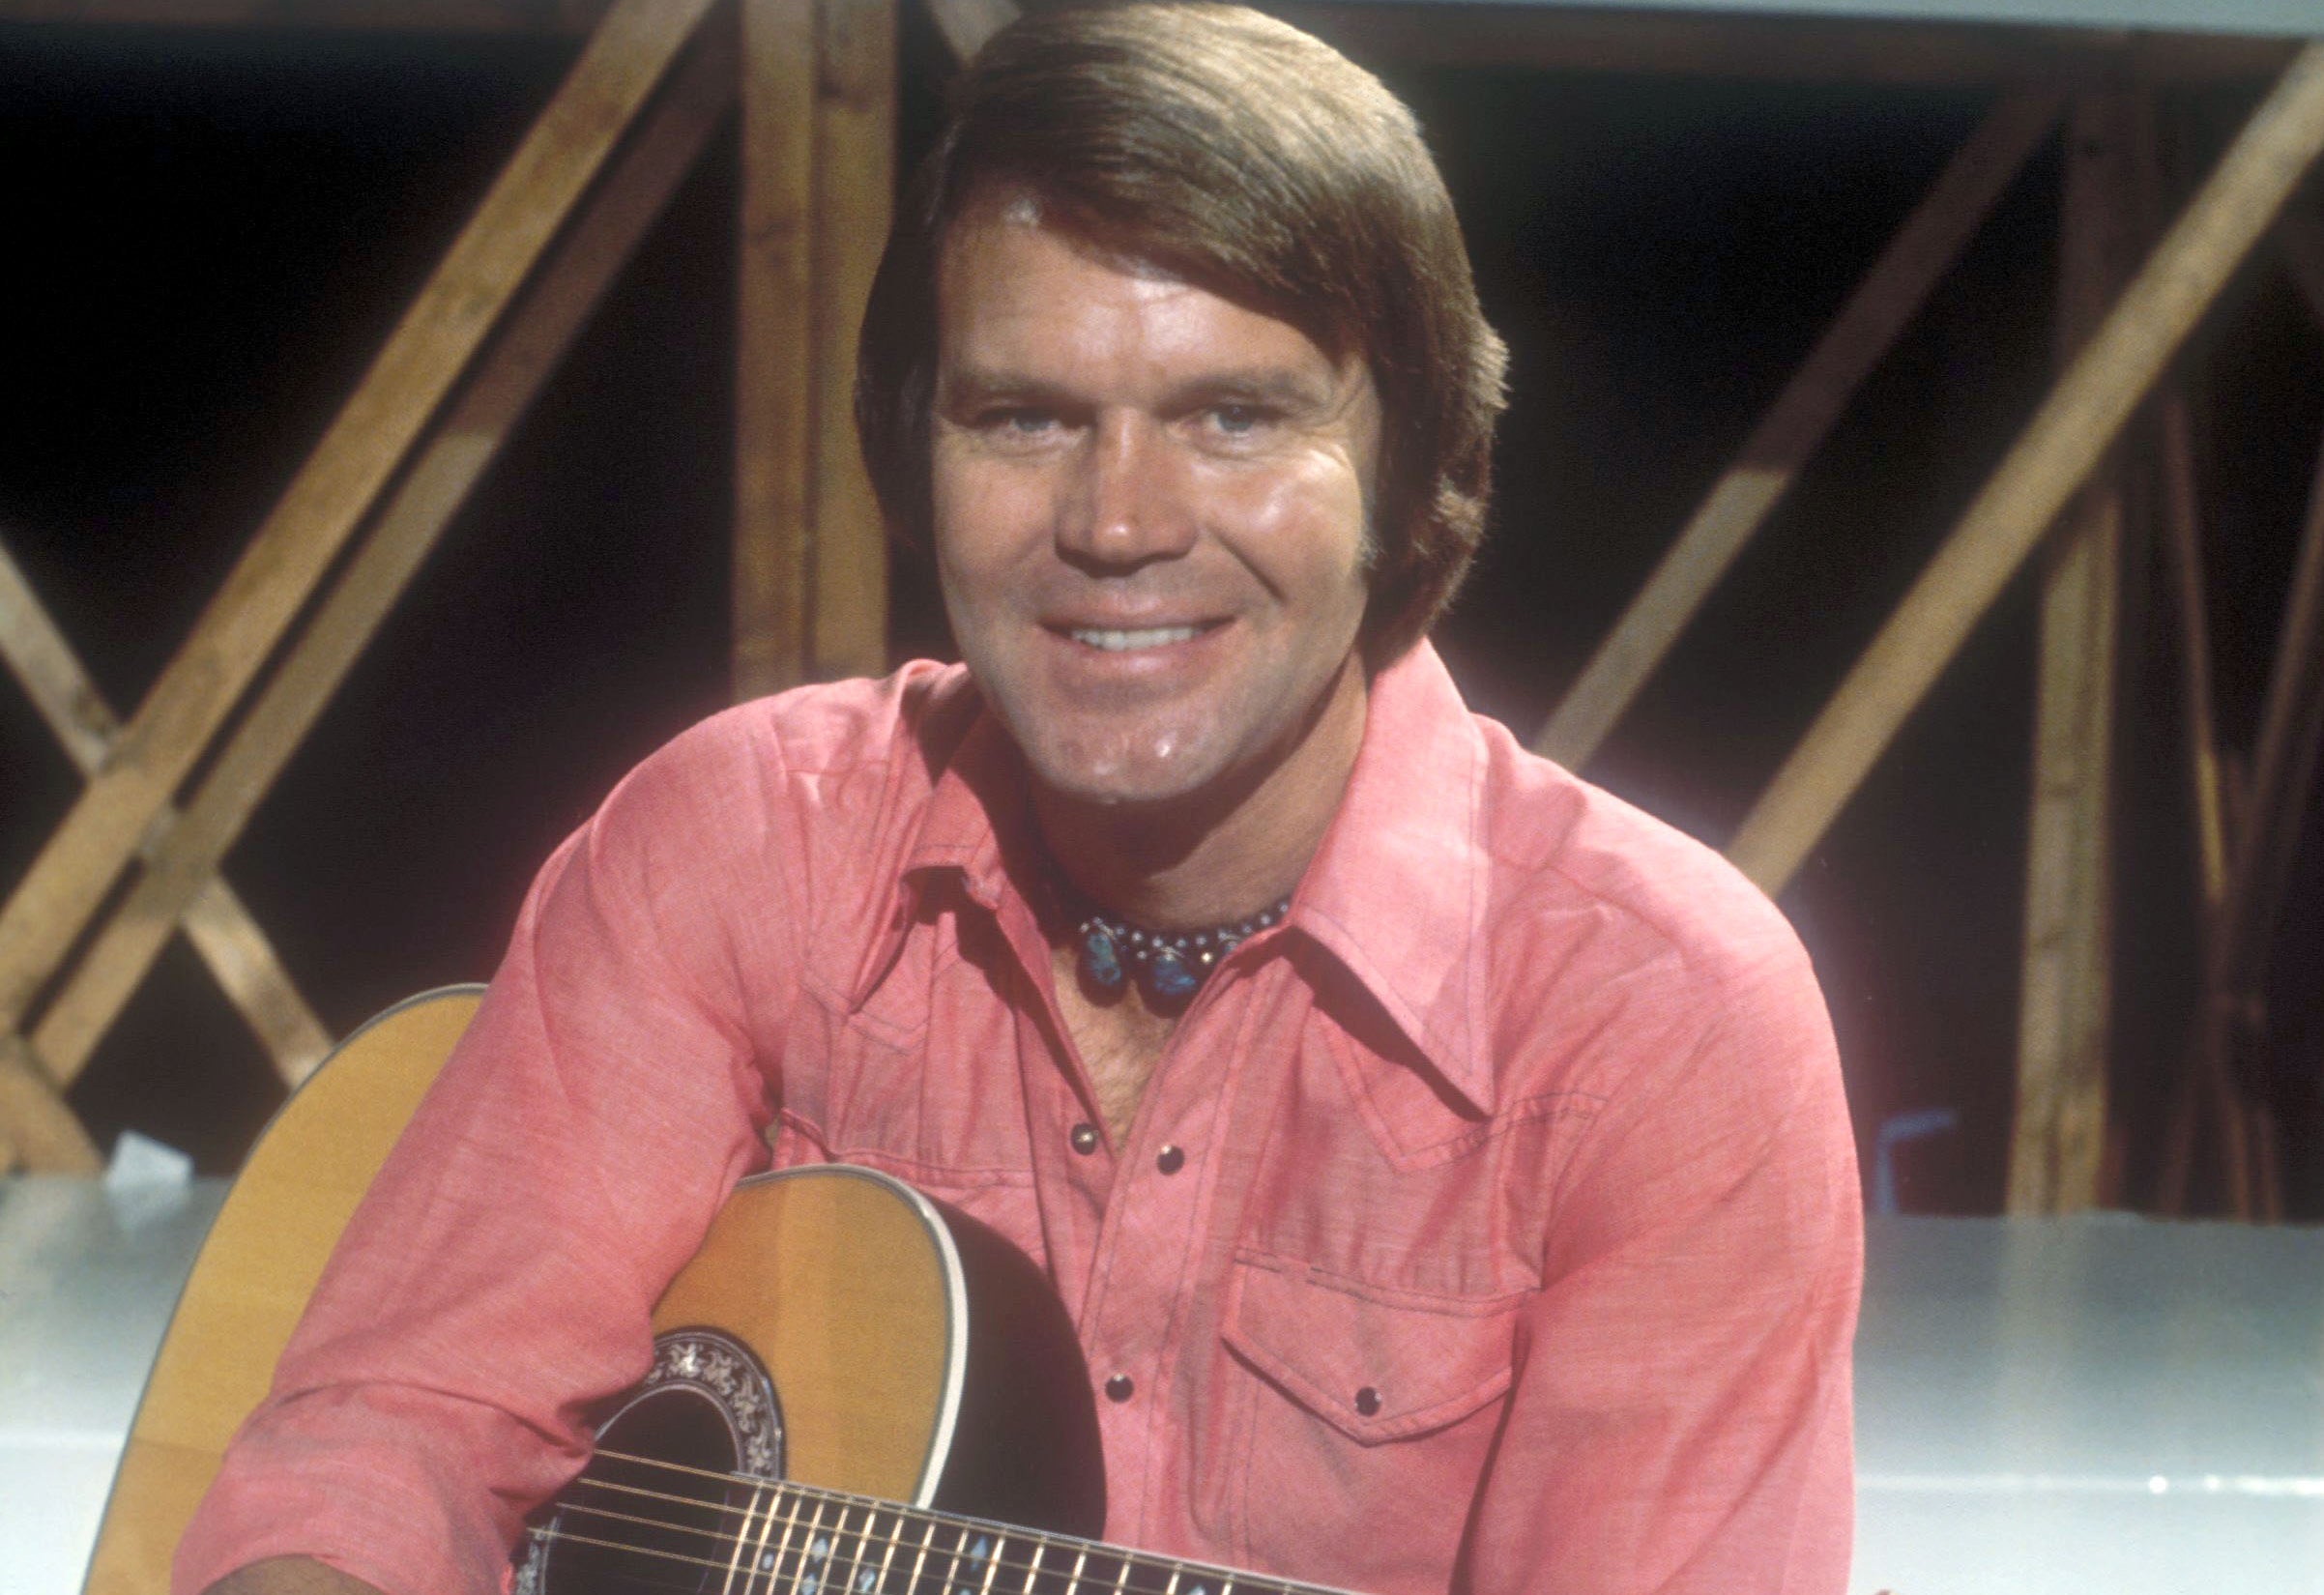 Rhinestone cowboy: the Arkansas man is fondly remembered for his wistful performances of the Jimmy Webb-penned ‘Galveston’ and ‘By the Time I Get to Phoenix’